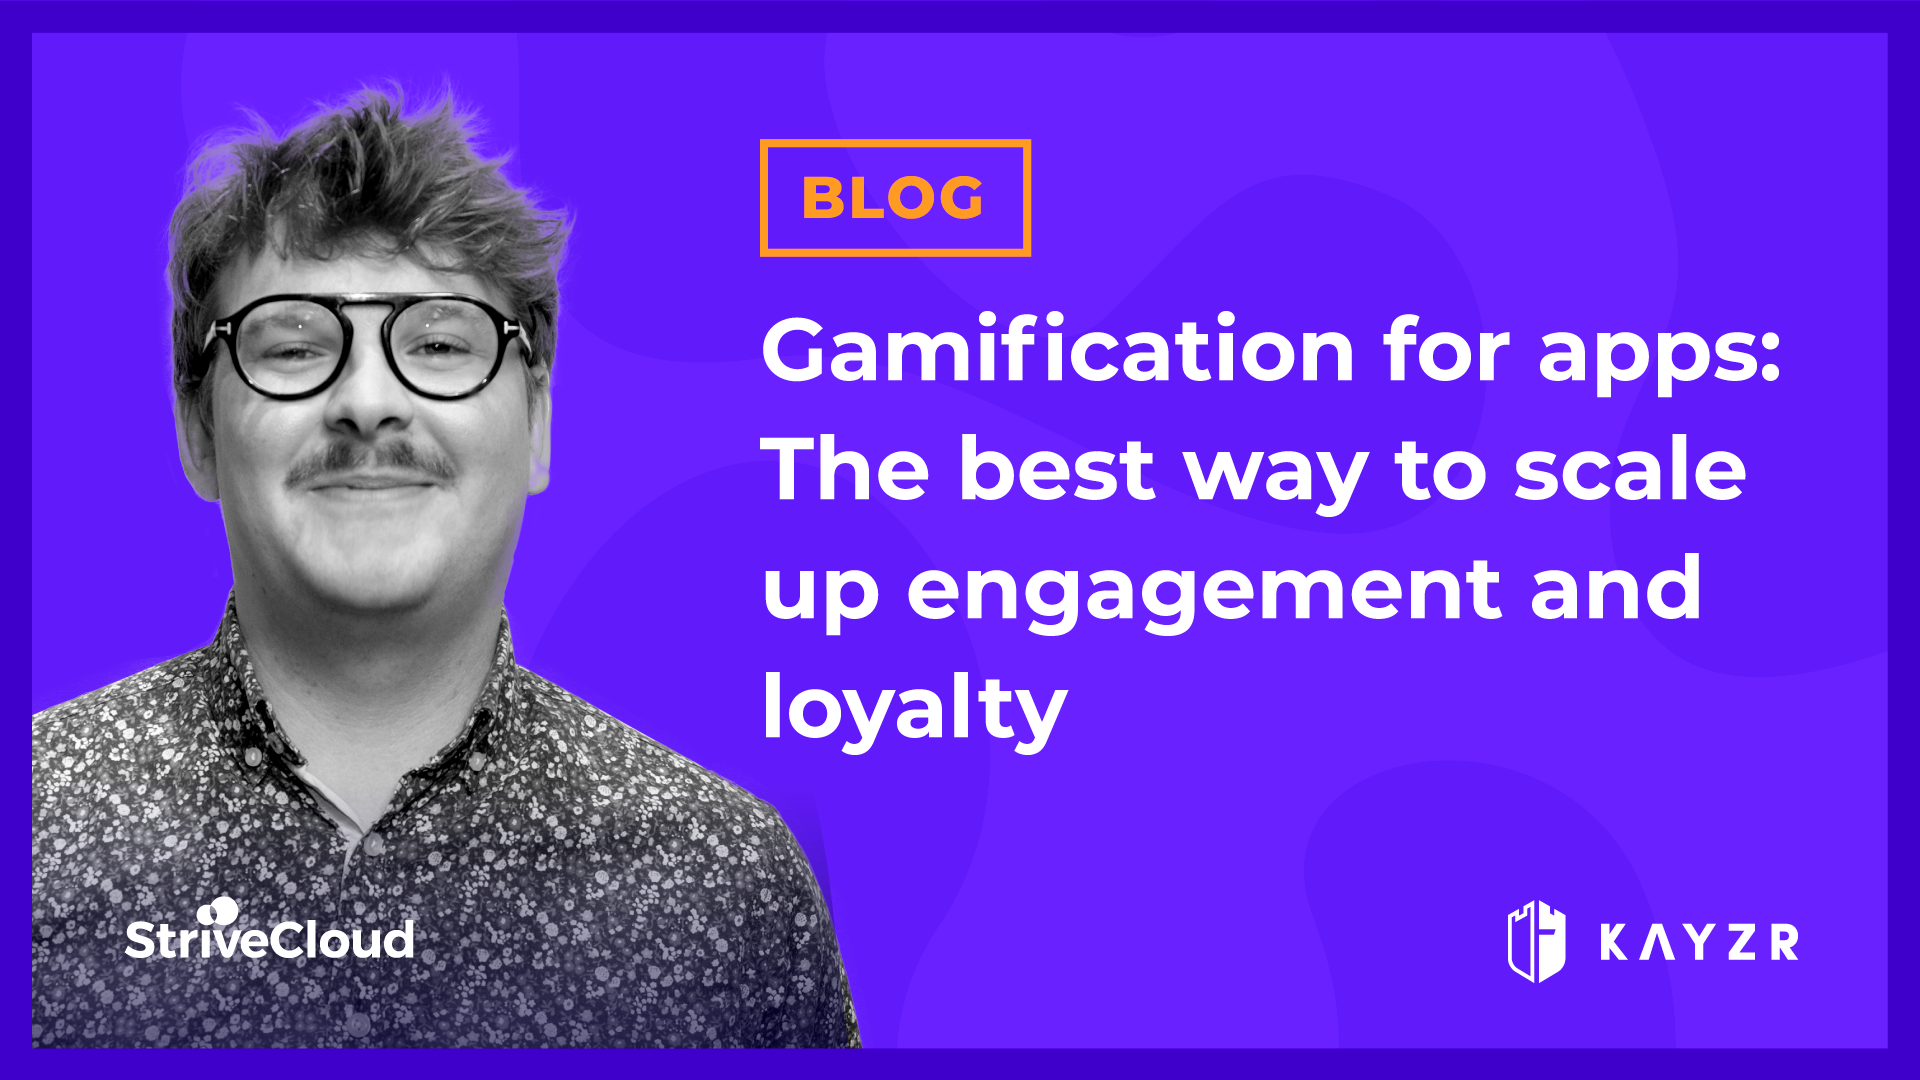 Gamification for apps: The best way to scale up engagement and loyalty